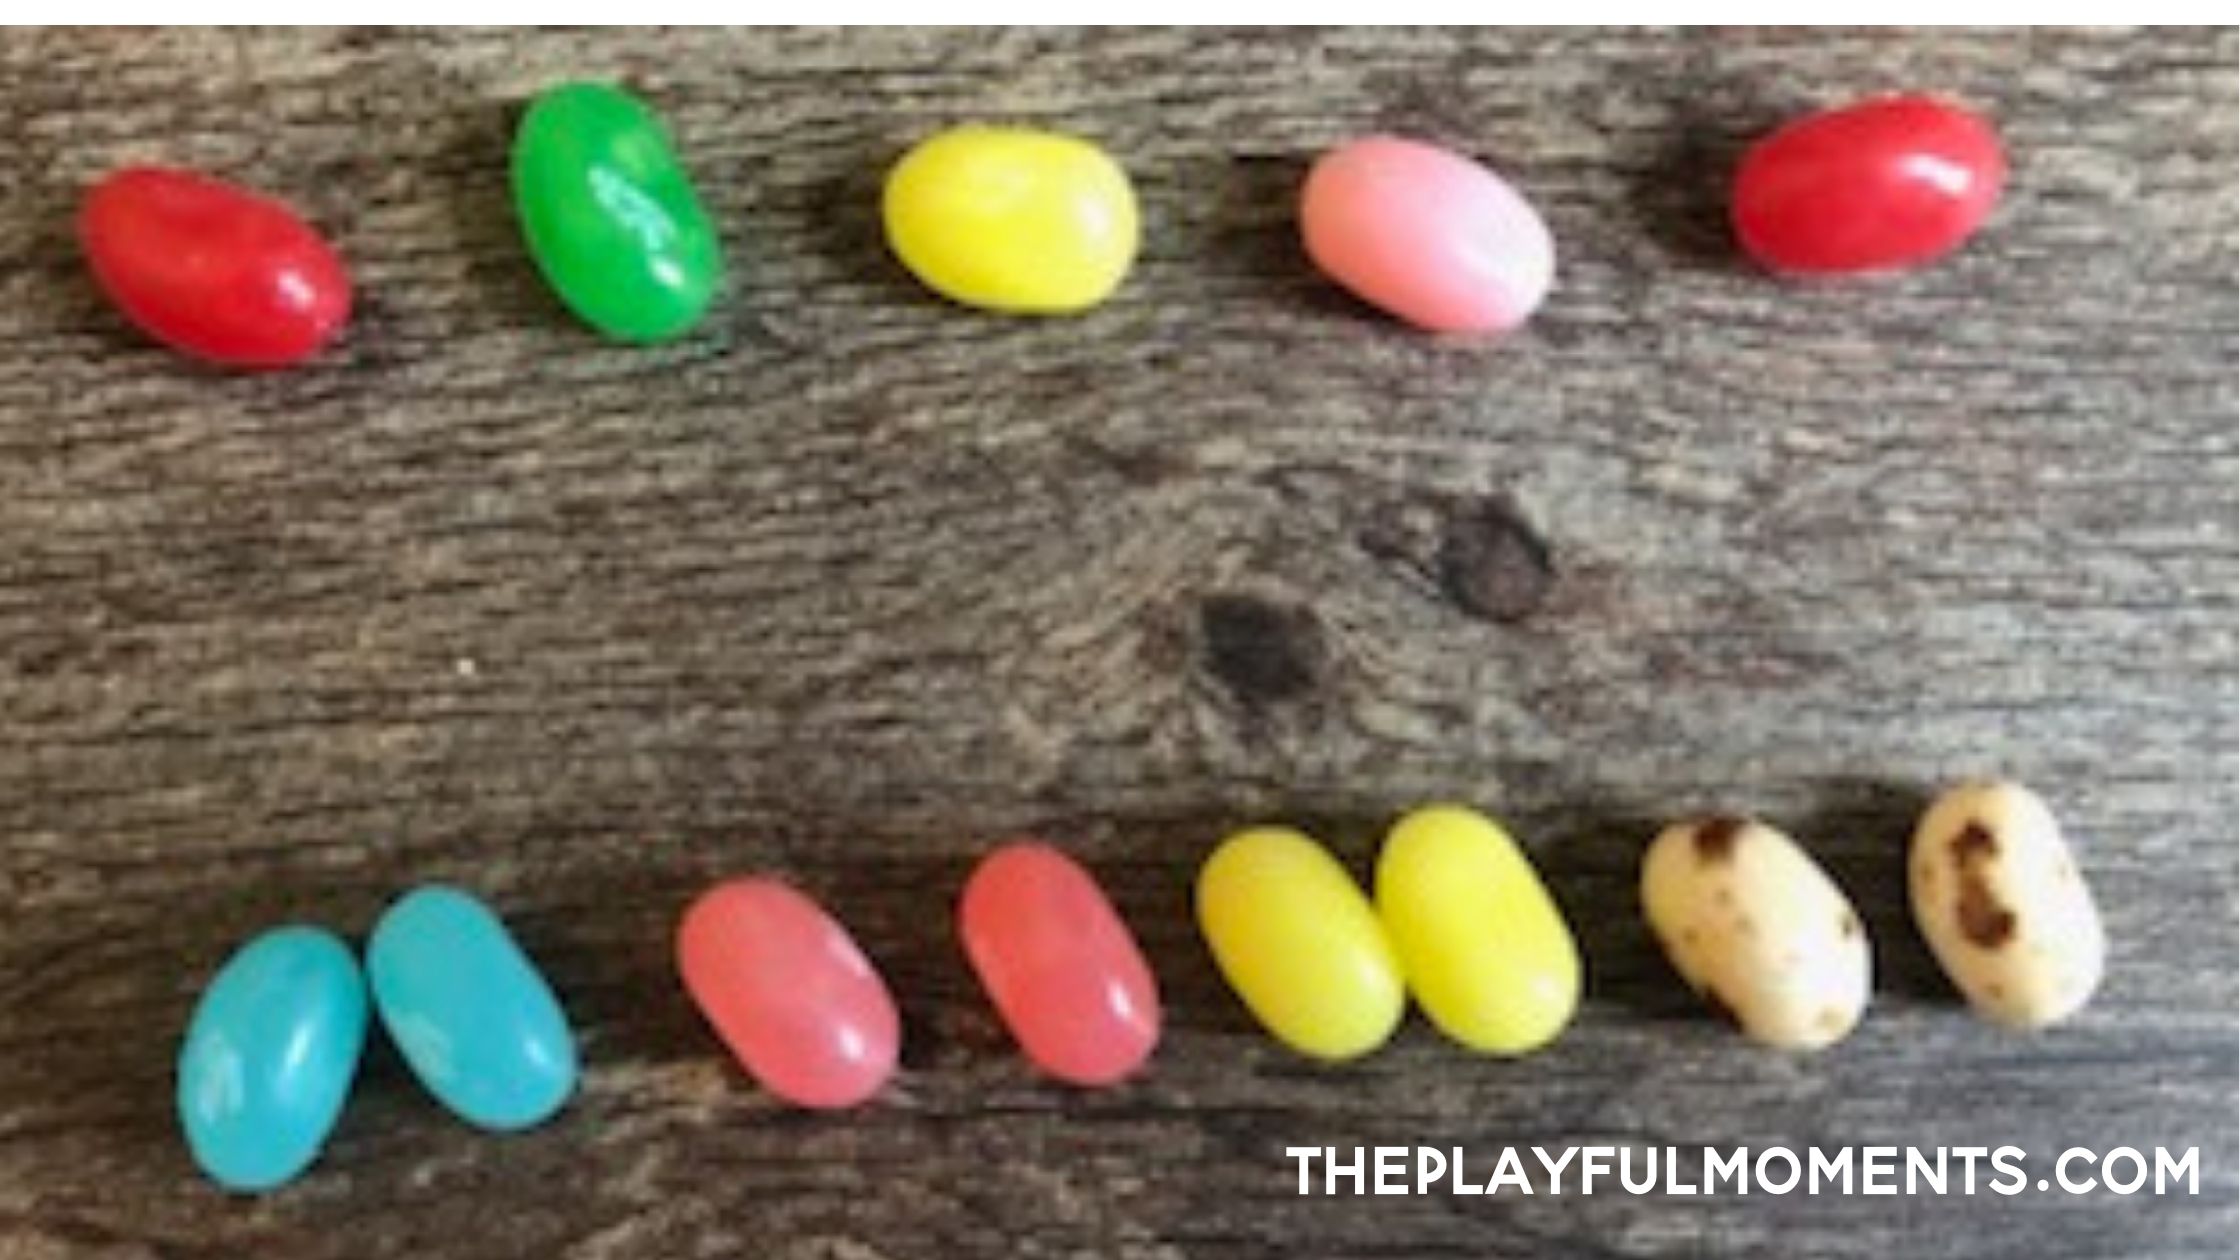 Patterns of jelly beans